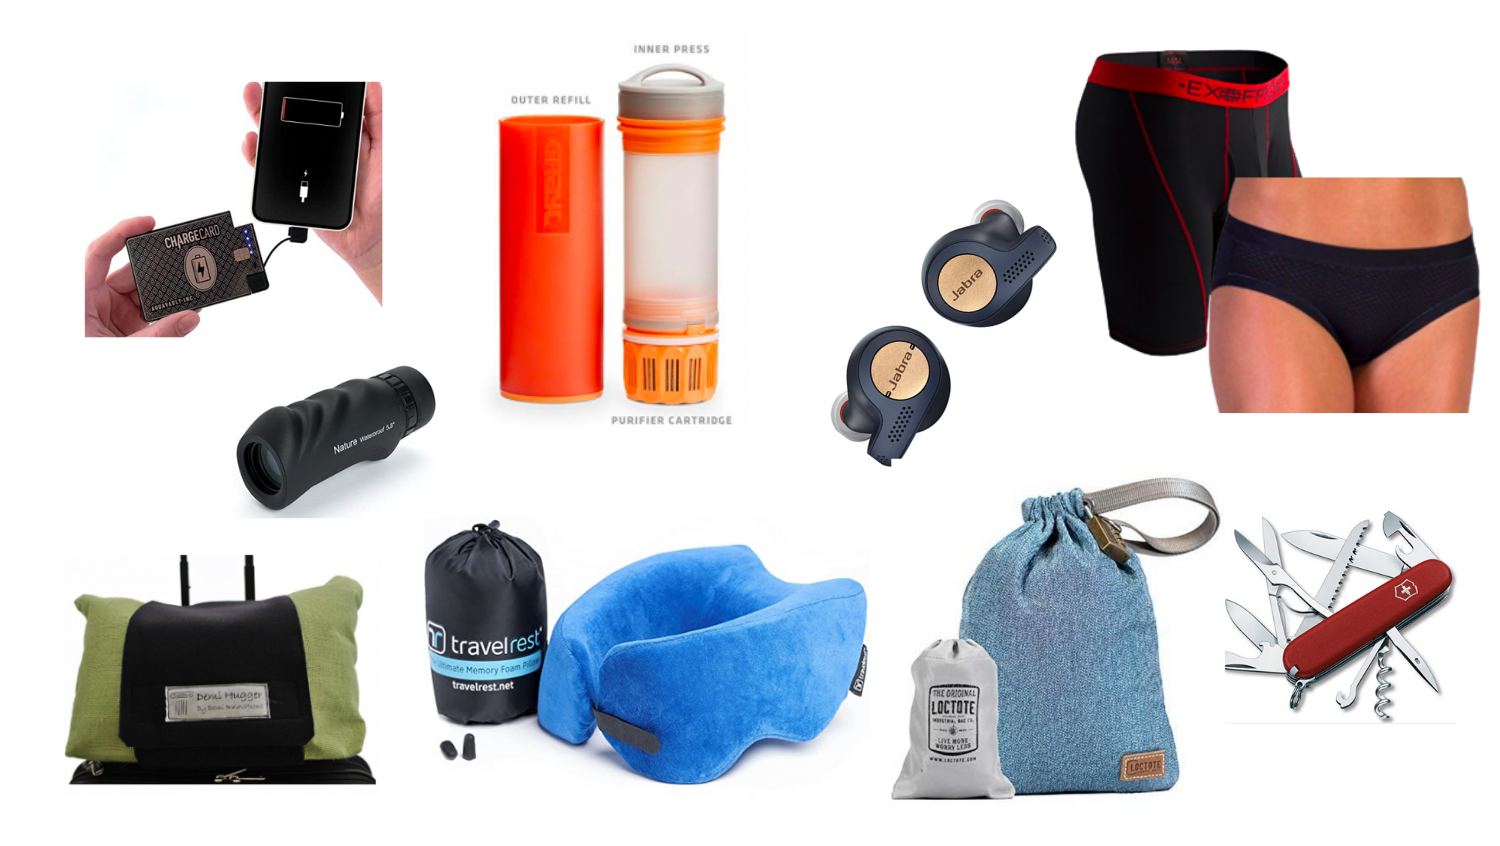 When it comes to travel gear, the sky's the limit. Here are the essentials.